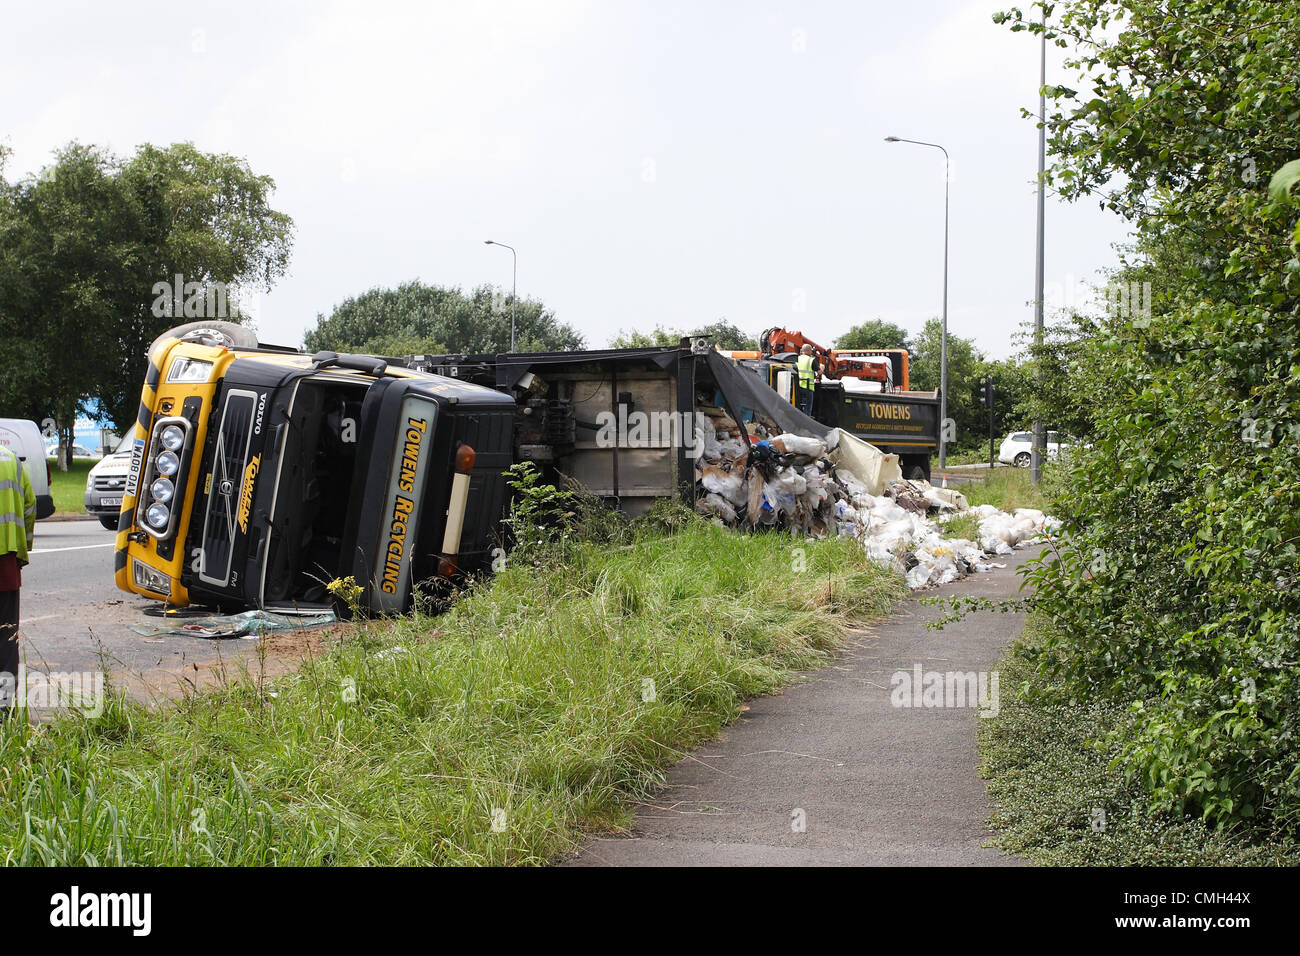 9th Aug 2012. A heavy truck owned by the Weston super Mare based Towens Recycling truned over on its side while travelling on A4174 round the Wick roundabout near the Willy Wicket pub. It was carrying waste for recycling. Credit:  Timothy Large / Alamy Live News Stock Photo